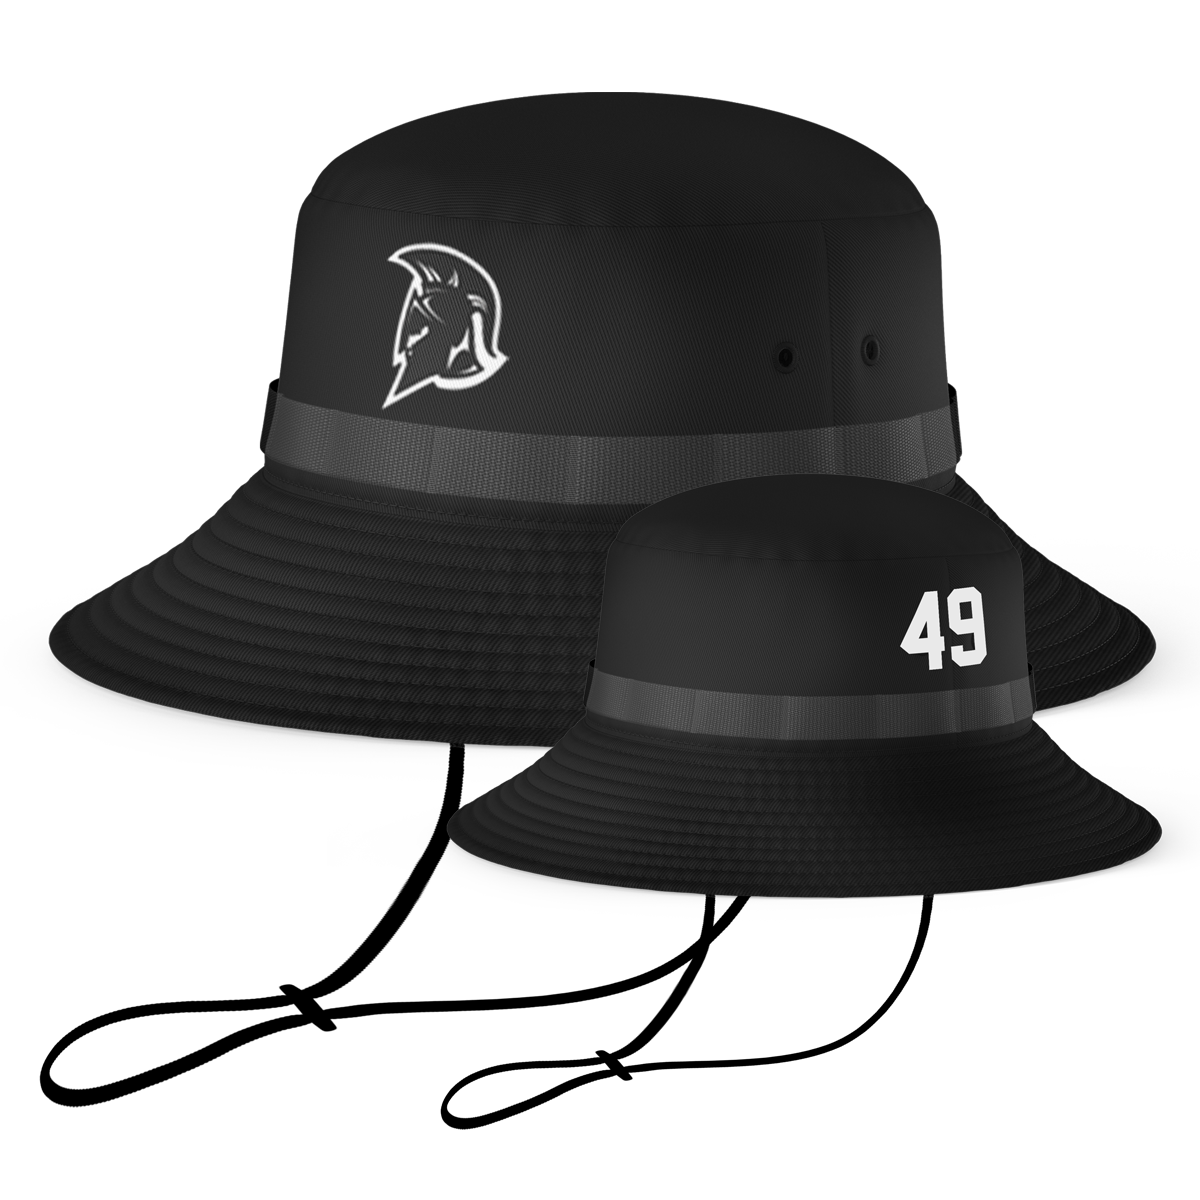 Spartans Bucket Hat with Playernumber/Initials